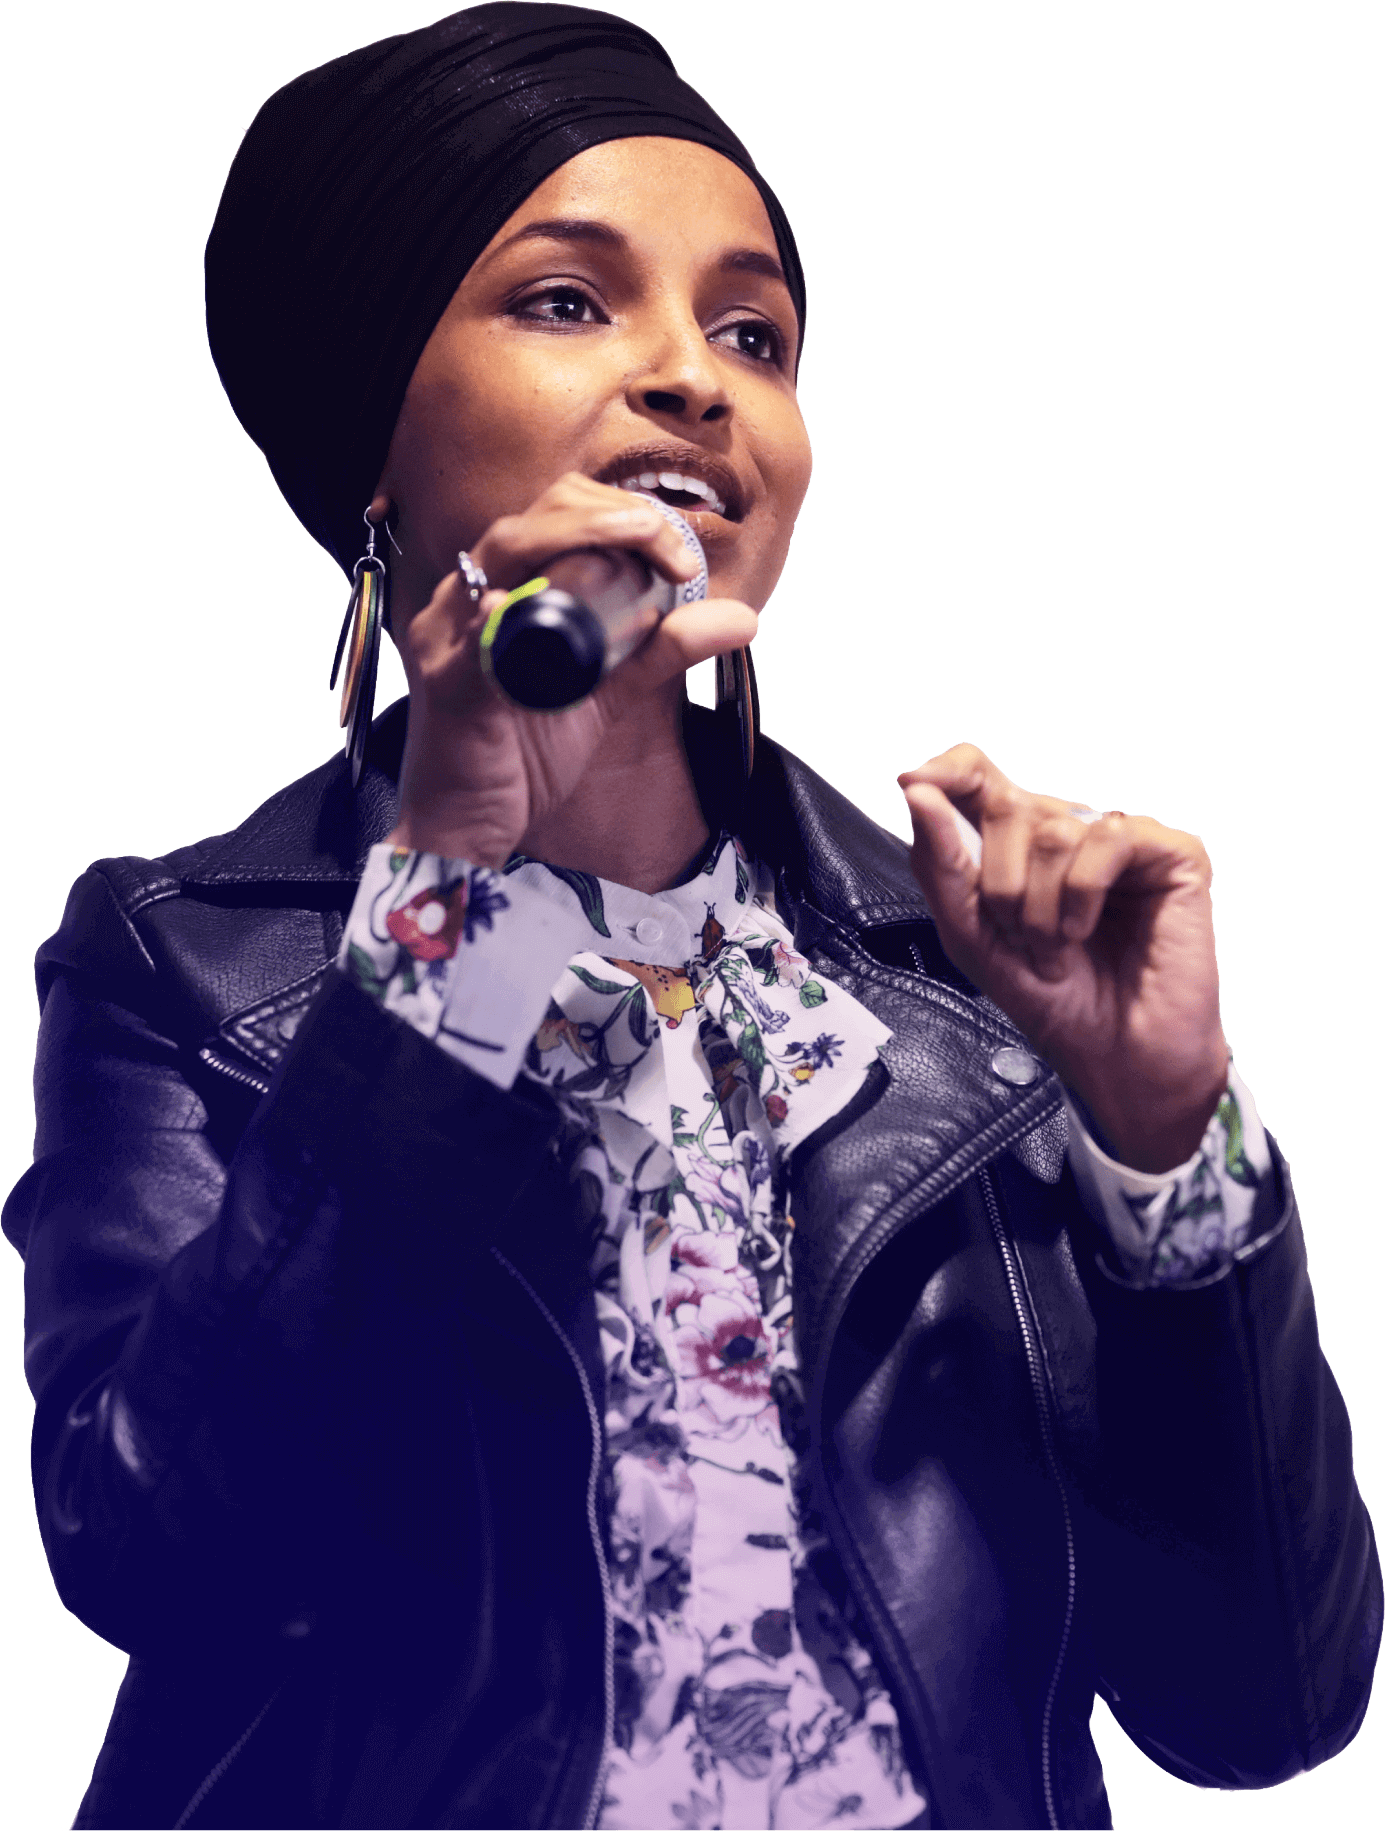 Ilhan Omar for Congress